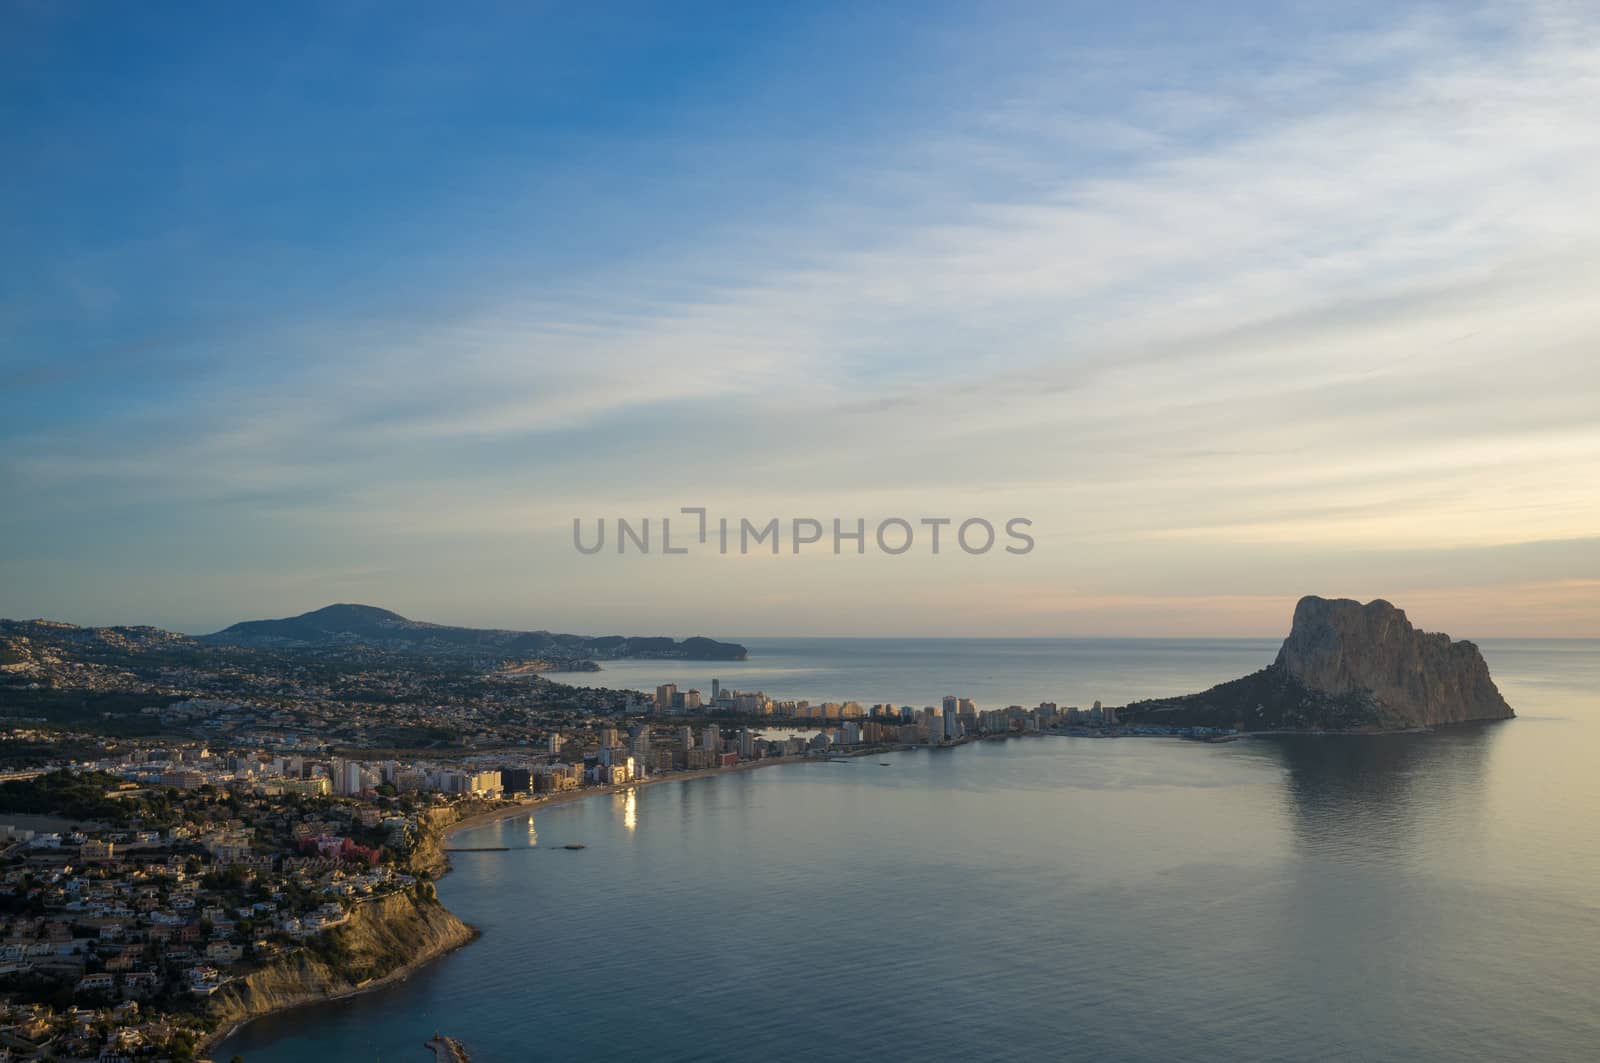 Costa Blanca resort Calpe from a high angle viewpoint